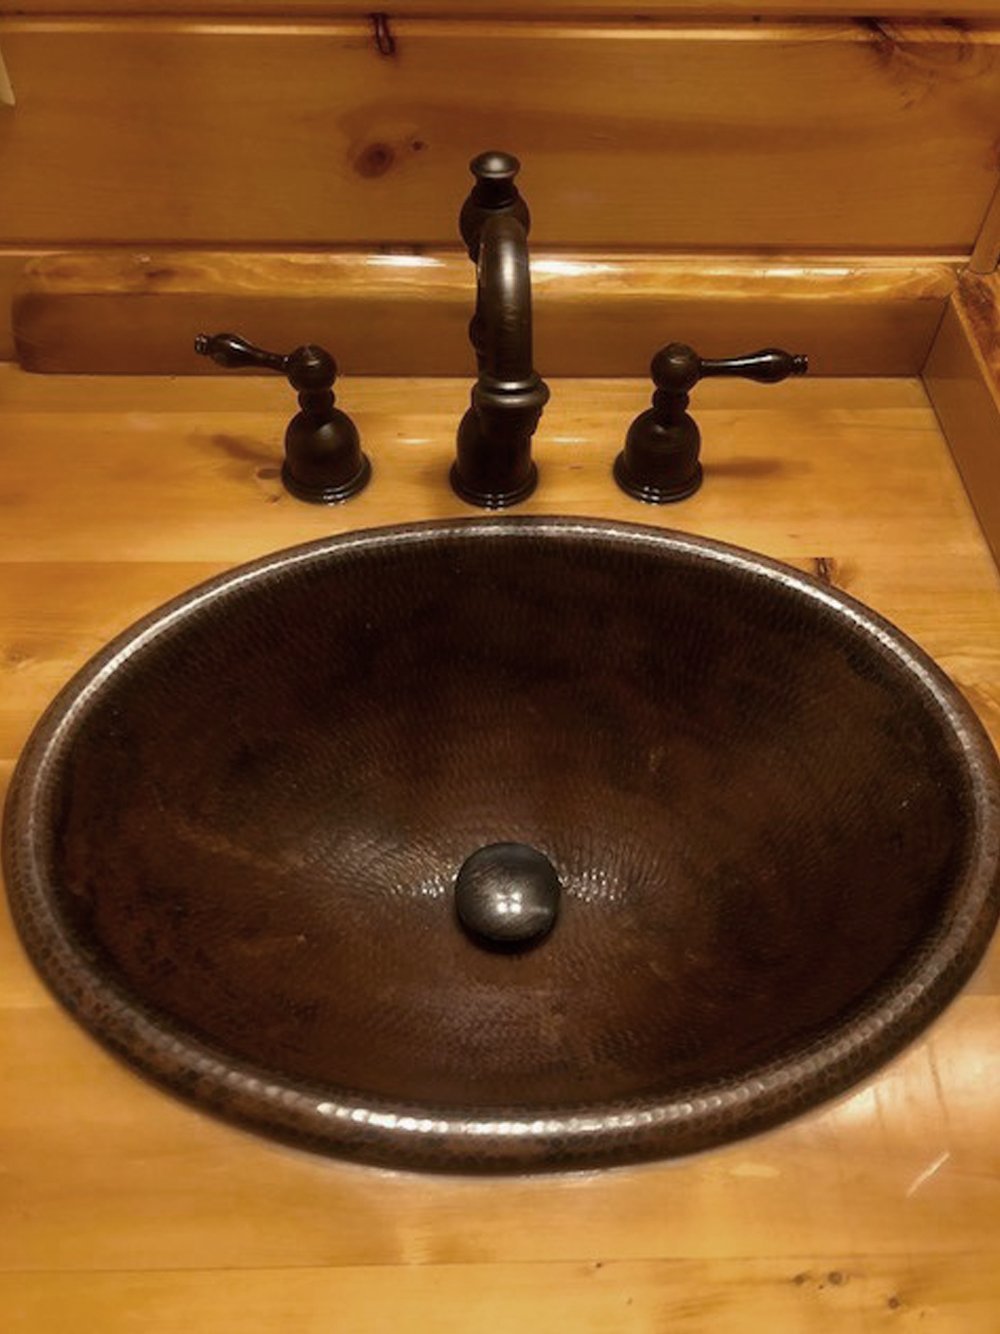 19" Oval Self Rimming Hammered Copper Sink - Rustic Kitchen & Bath - Bathroom Sink - Premier Copper Products